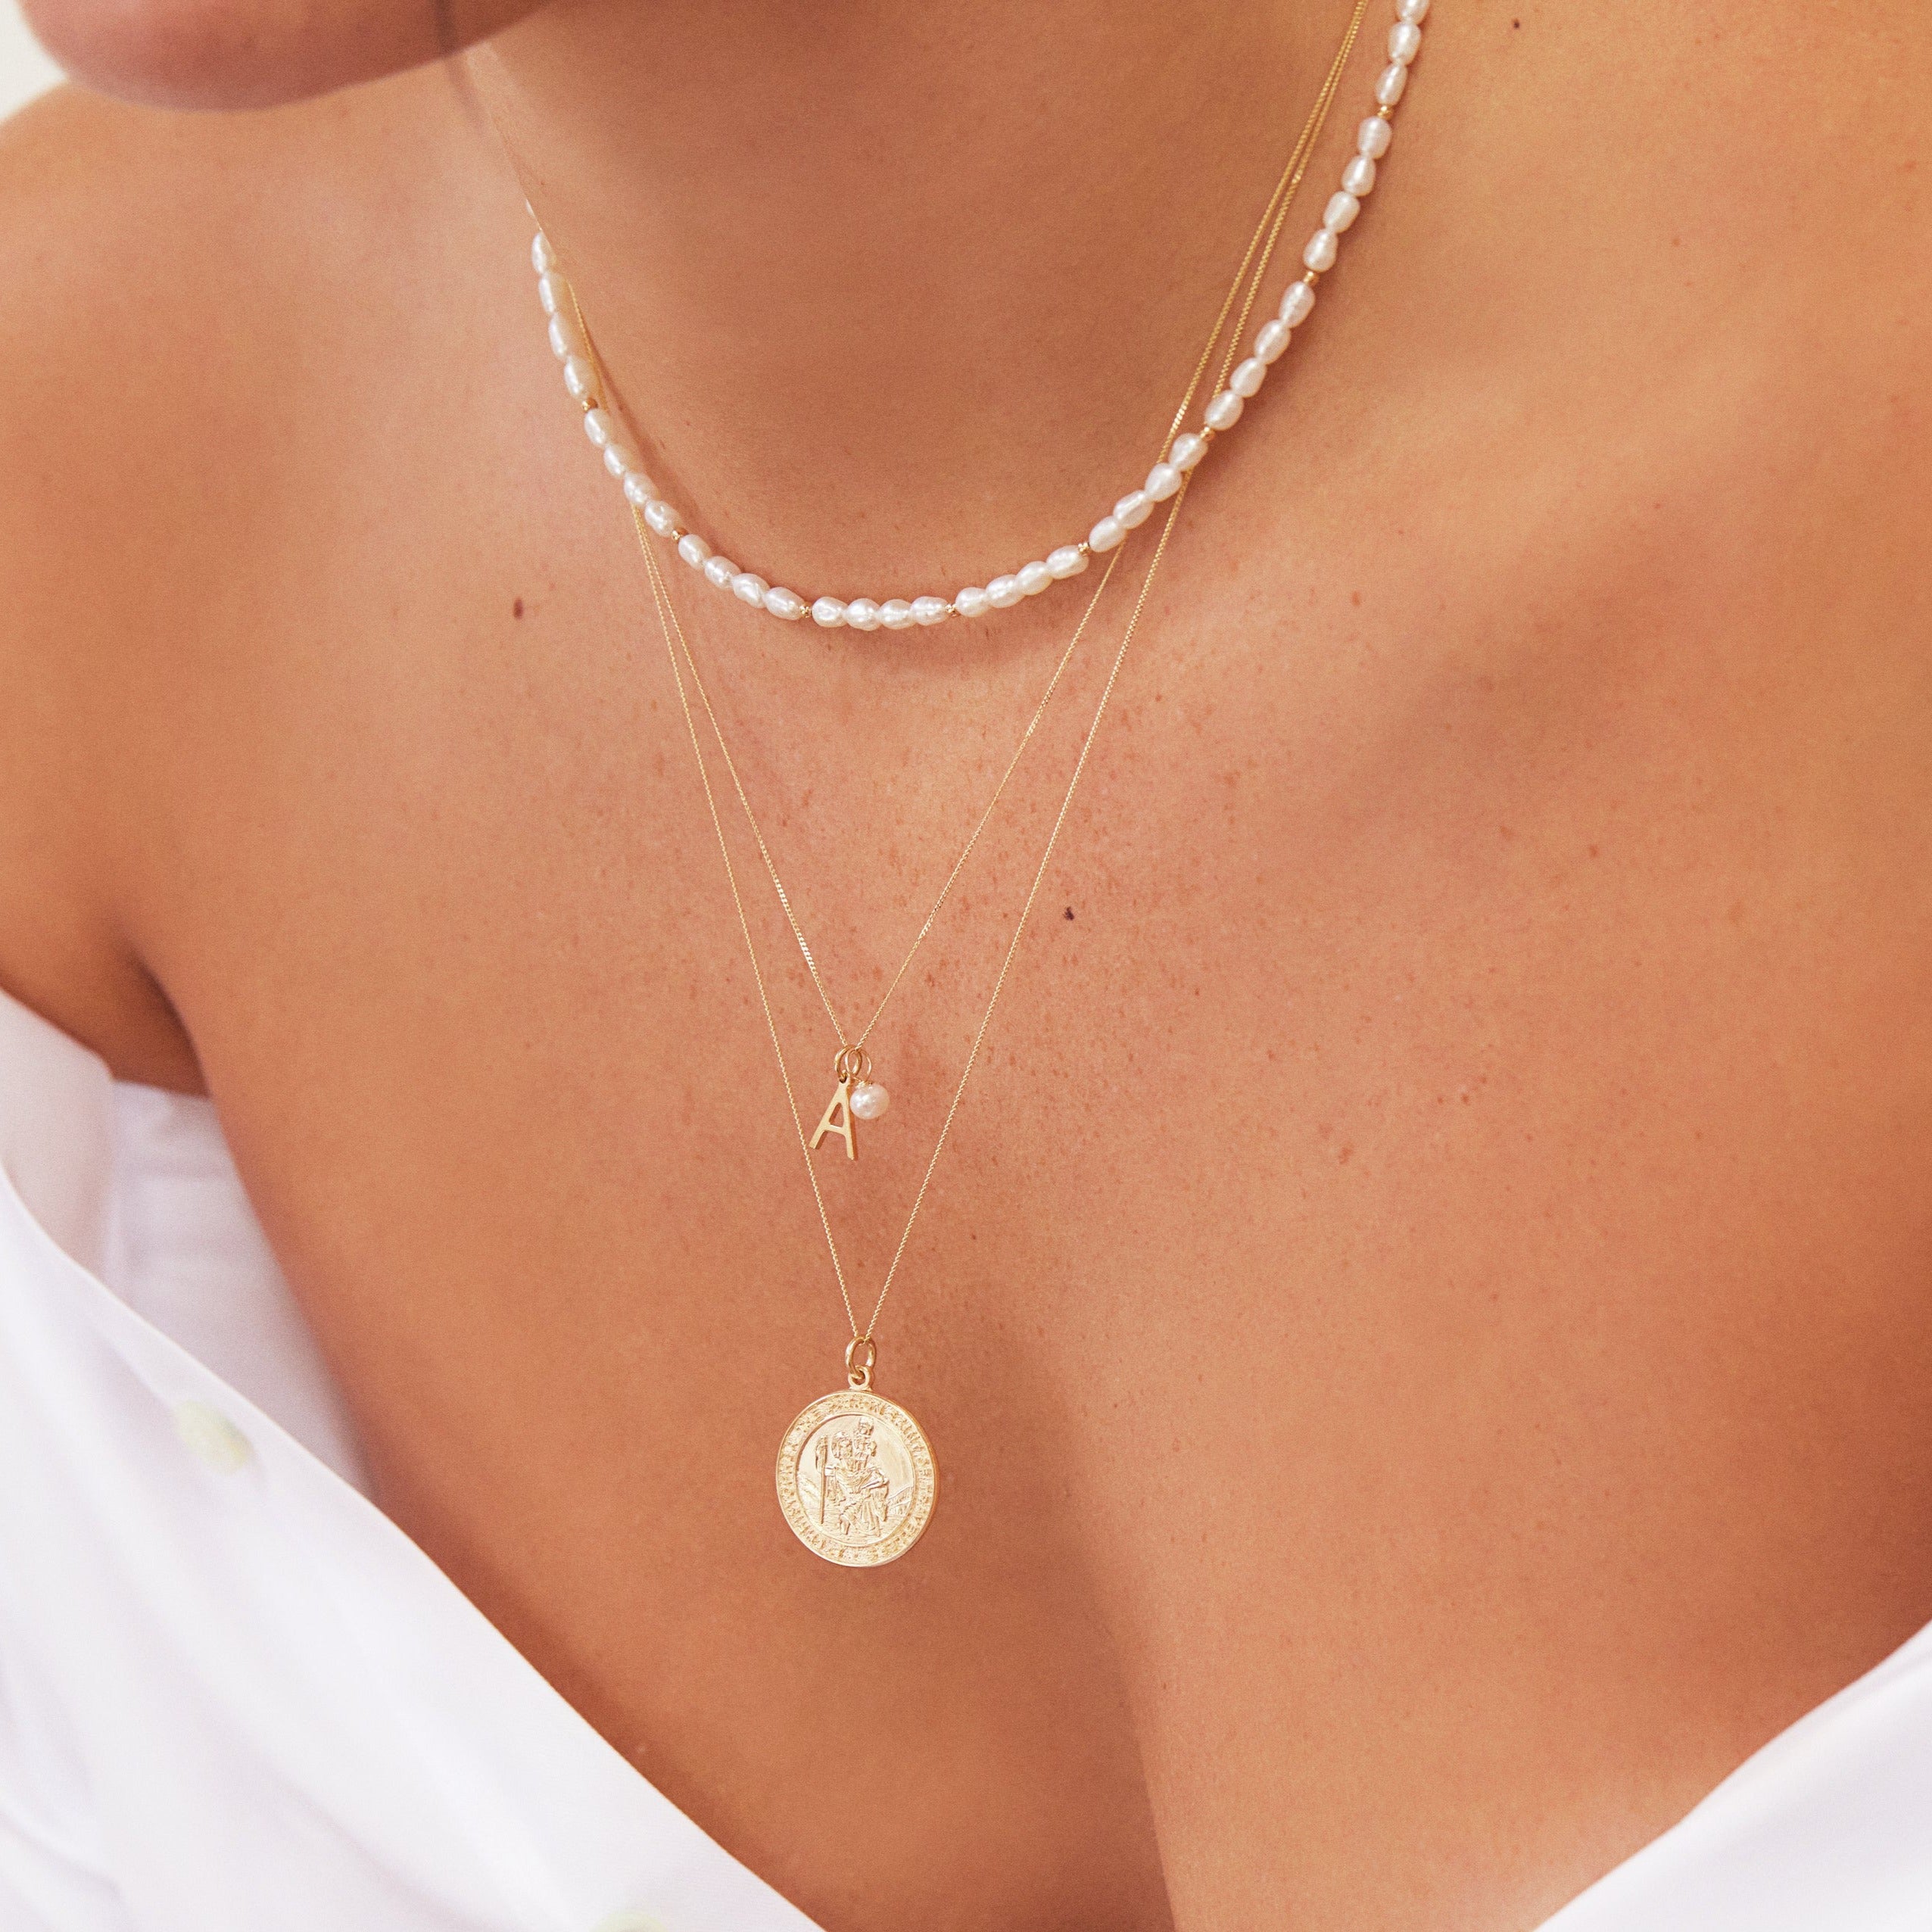 Gold beaded seed pearl choker layered with an A letter gold necklace and a gold symbol necklace around the neck